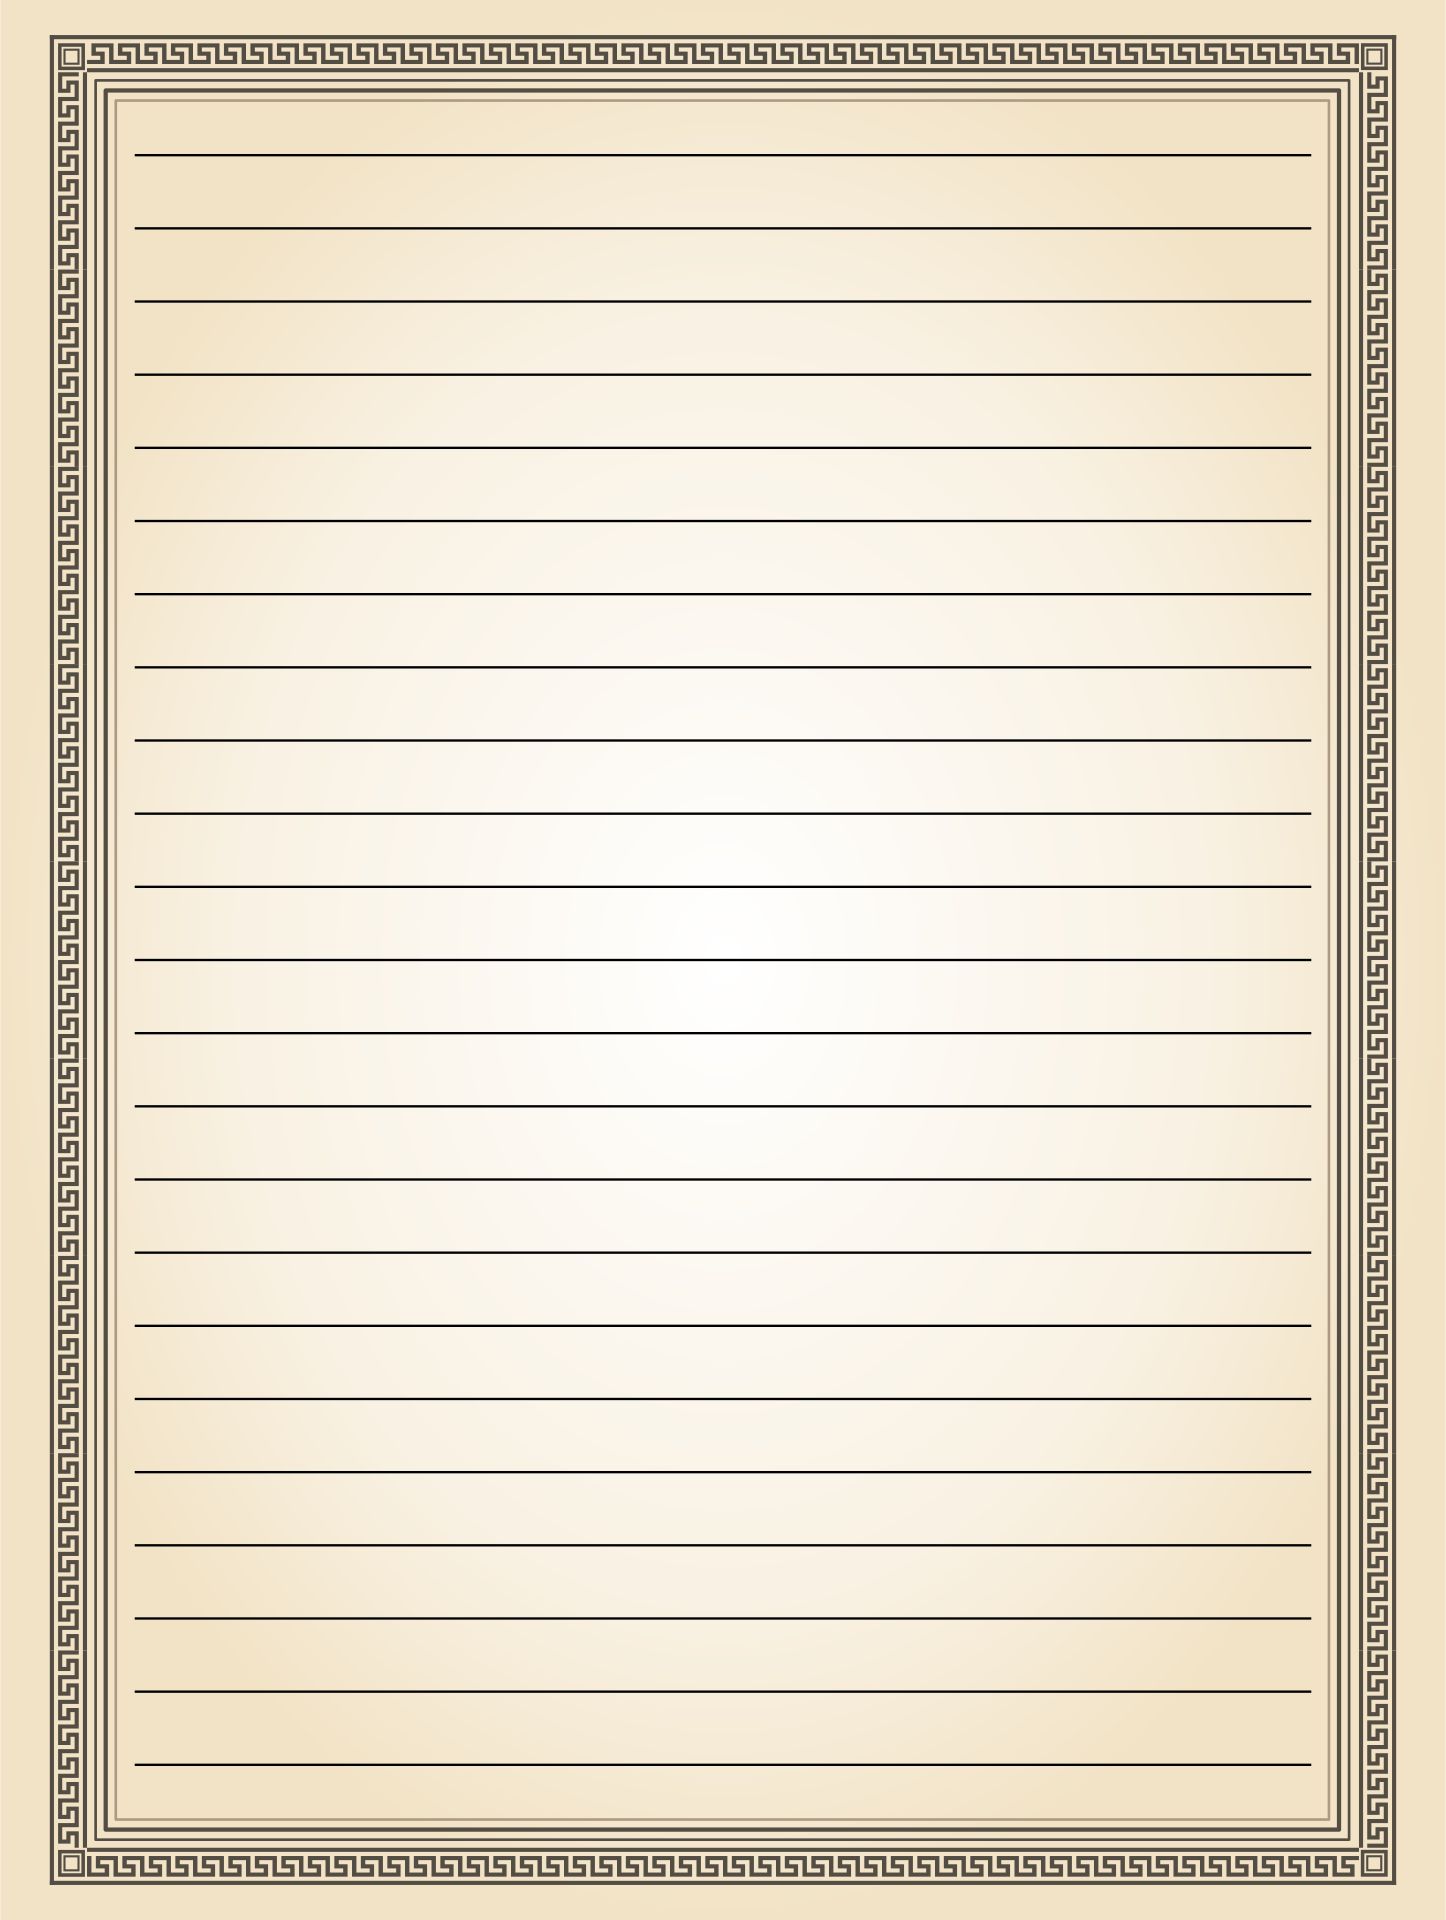 printable-lined-paper-printable-lined-paper-jpg-and-pdf-templates